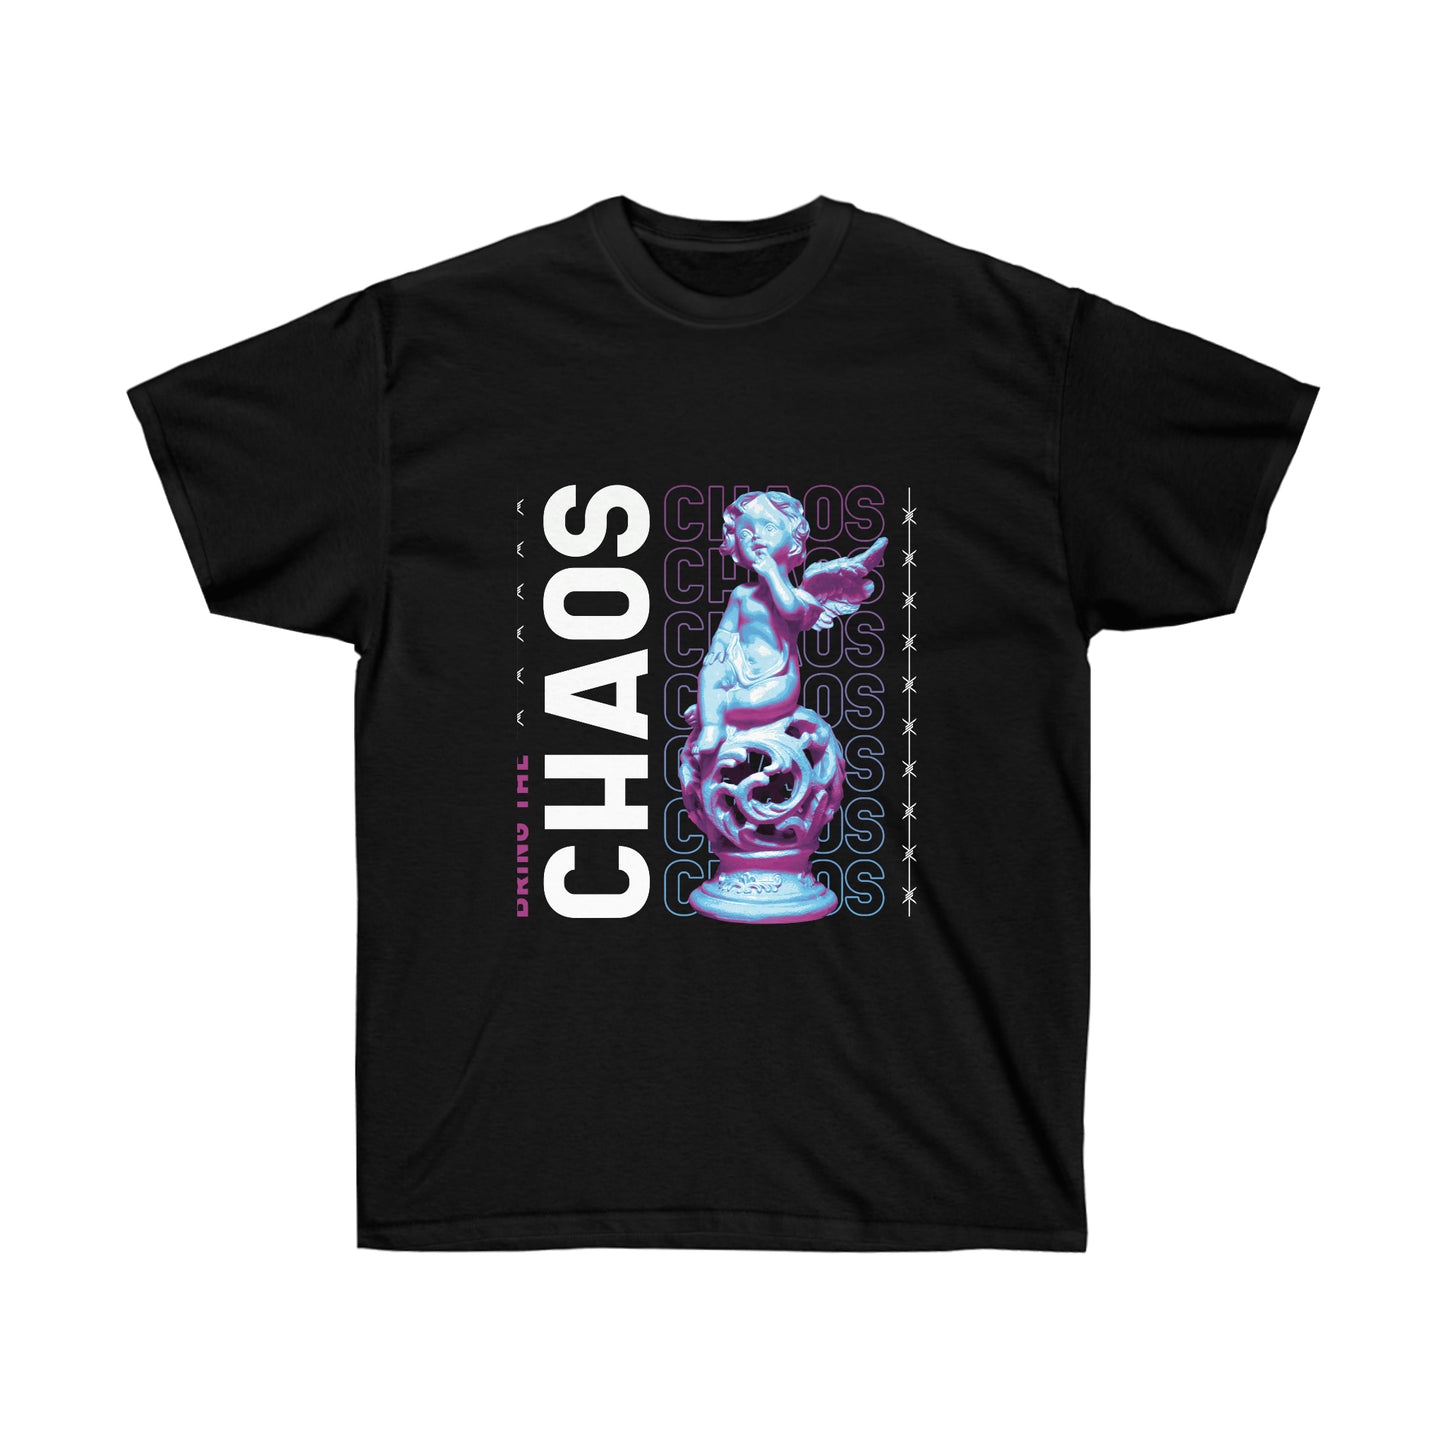 Bring The Chaos Y2k Aesthetic T-Shirt